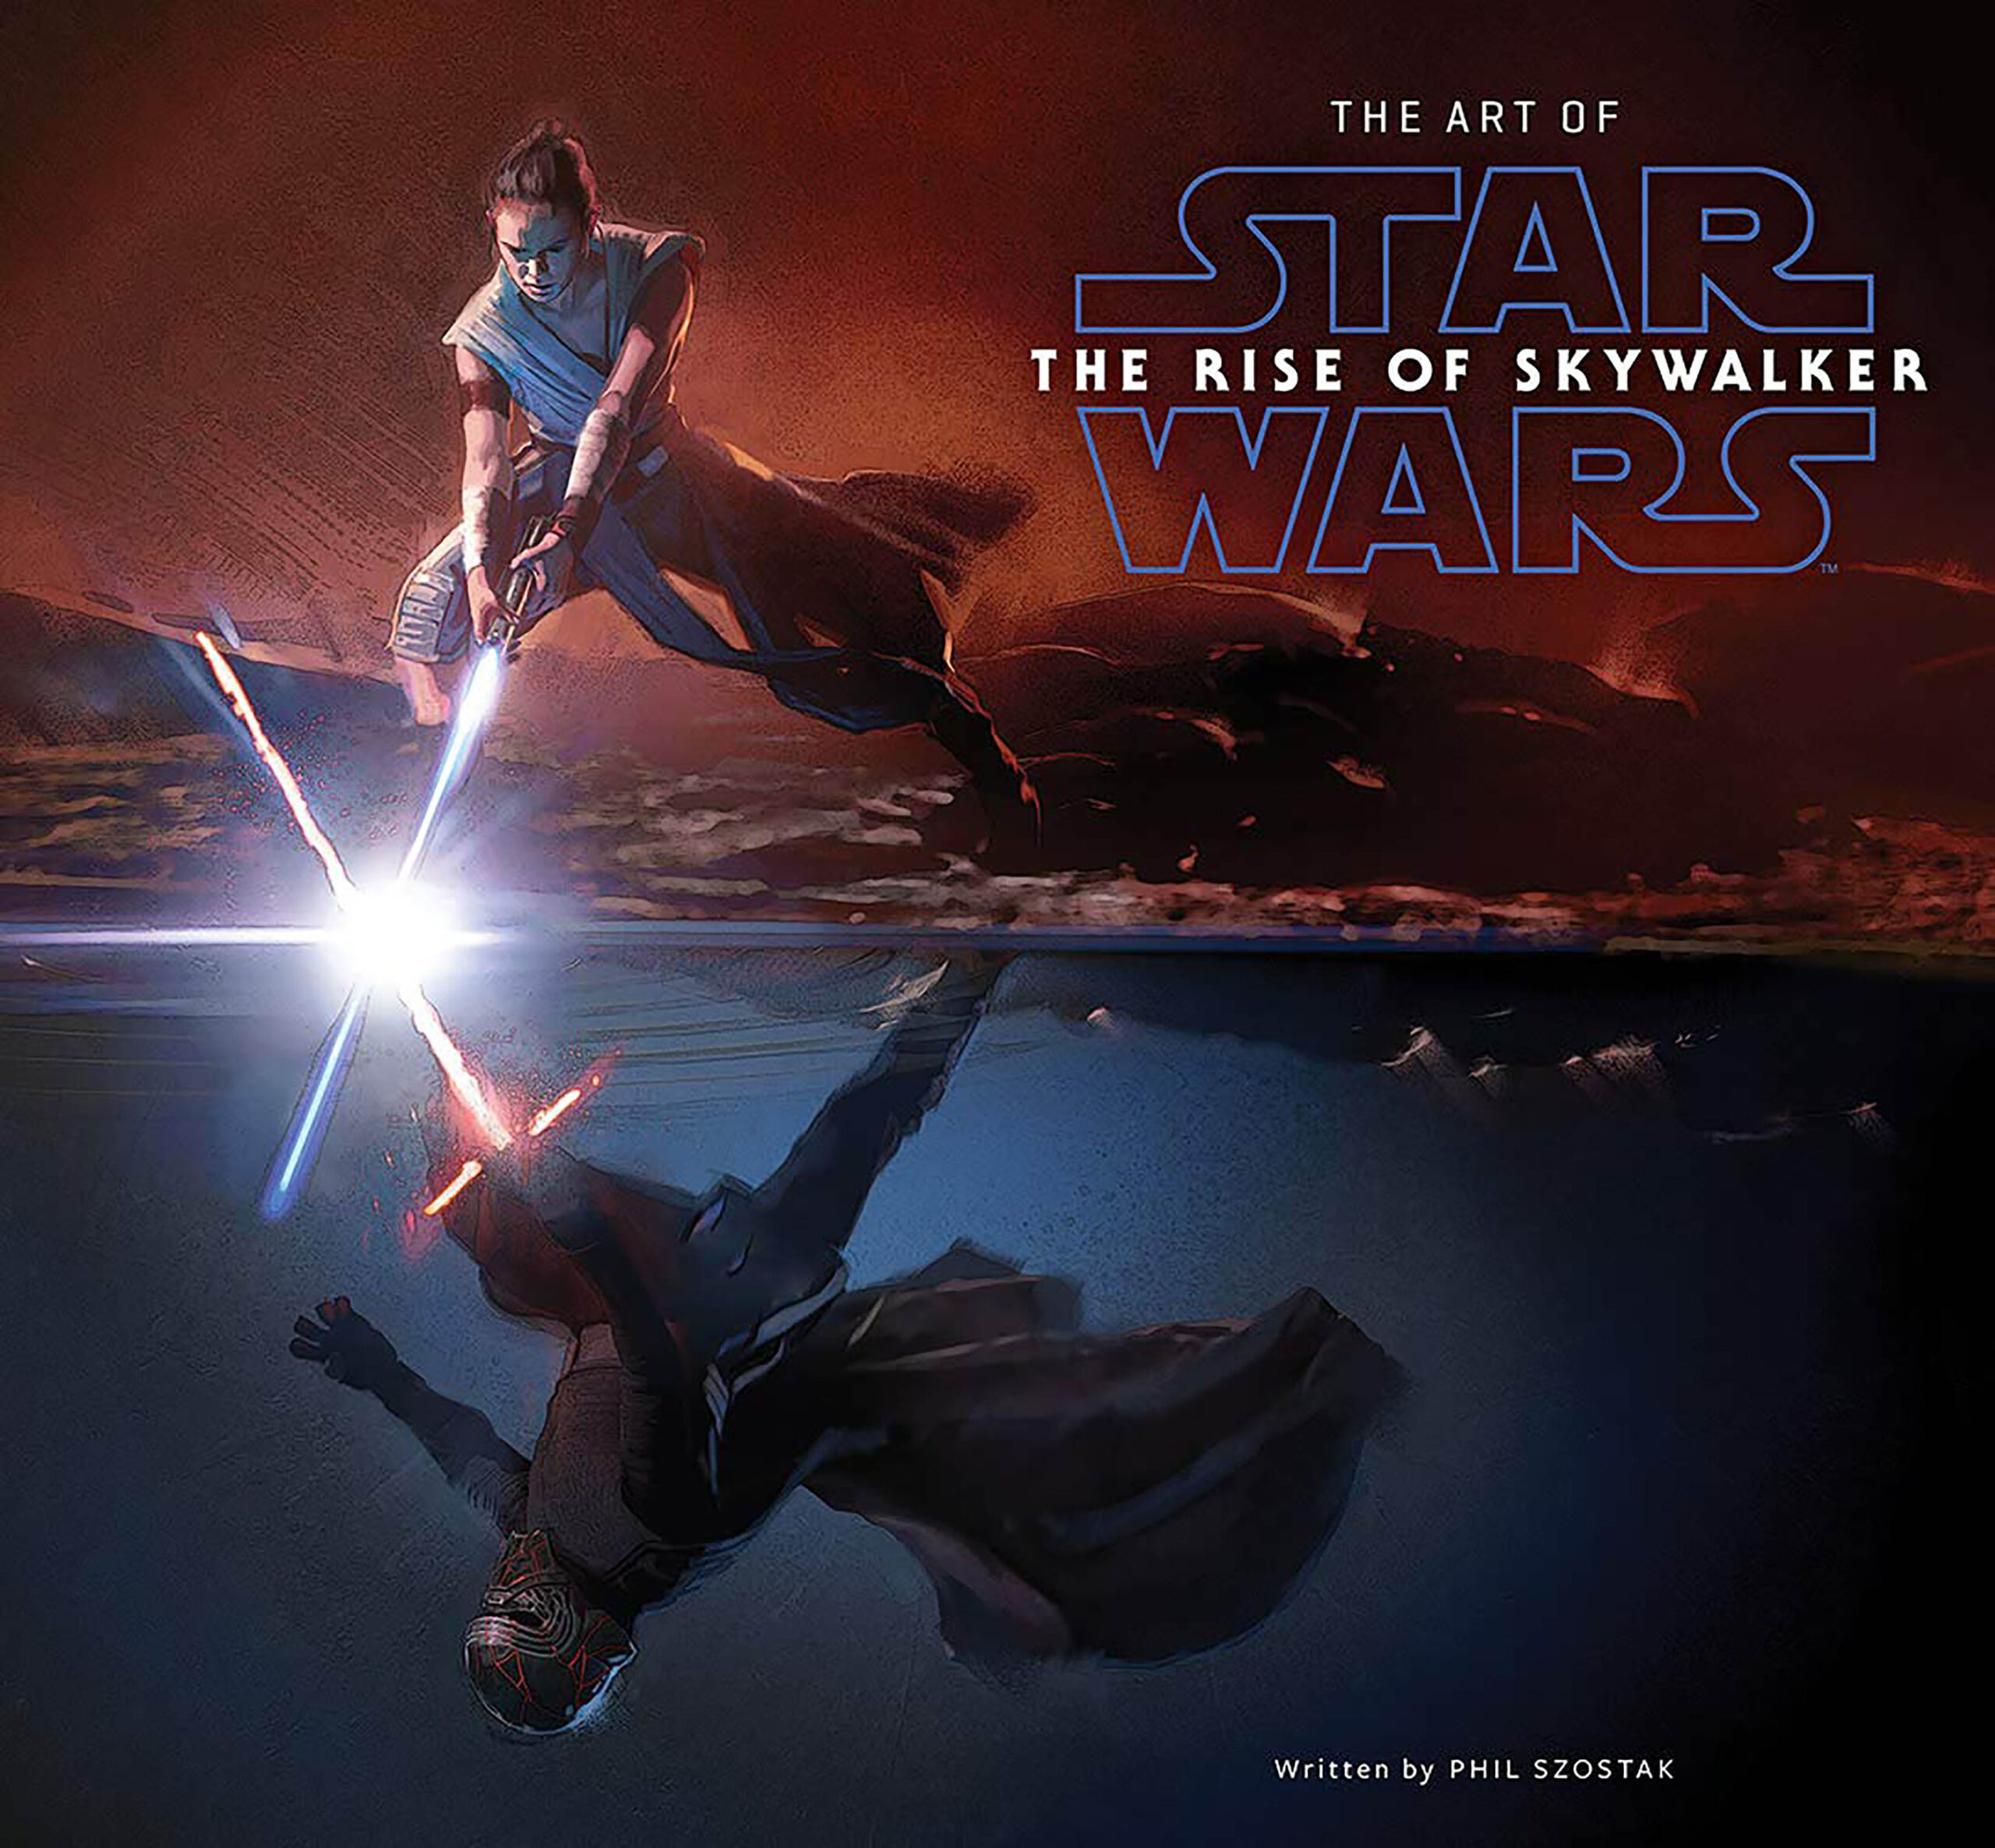 The Art of Star Wars – The Rise of Skywalker